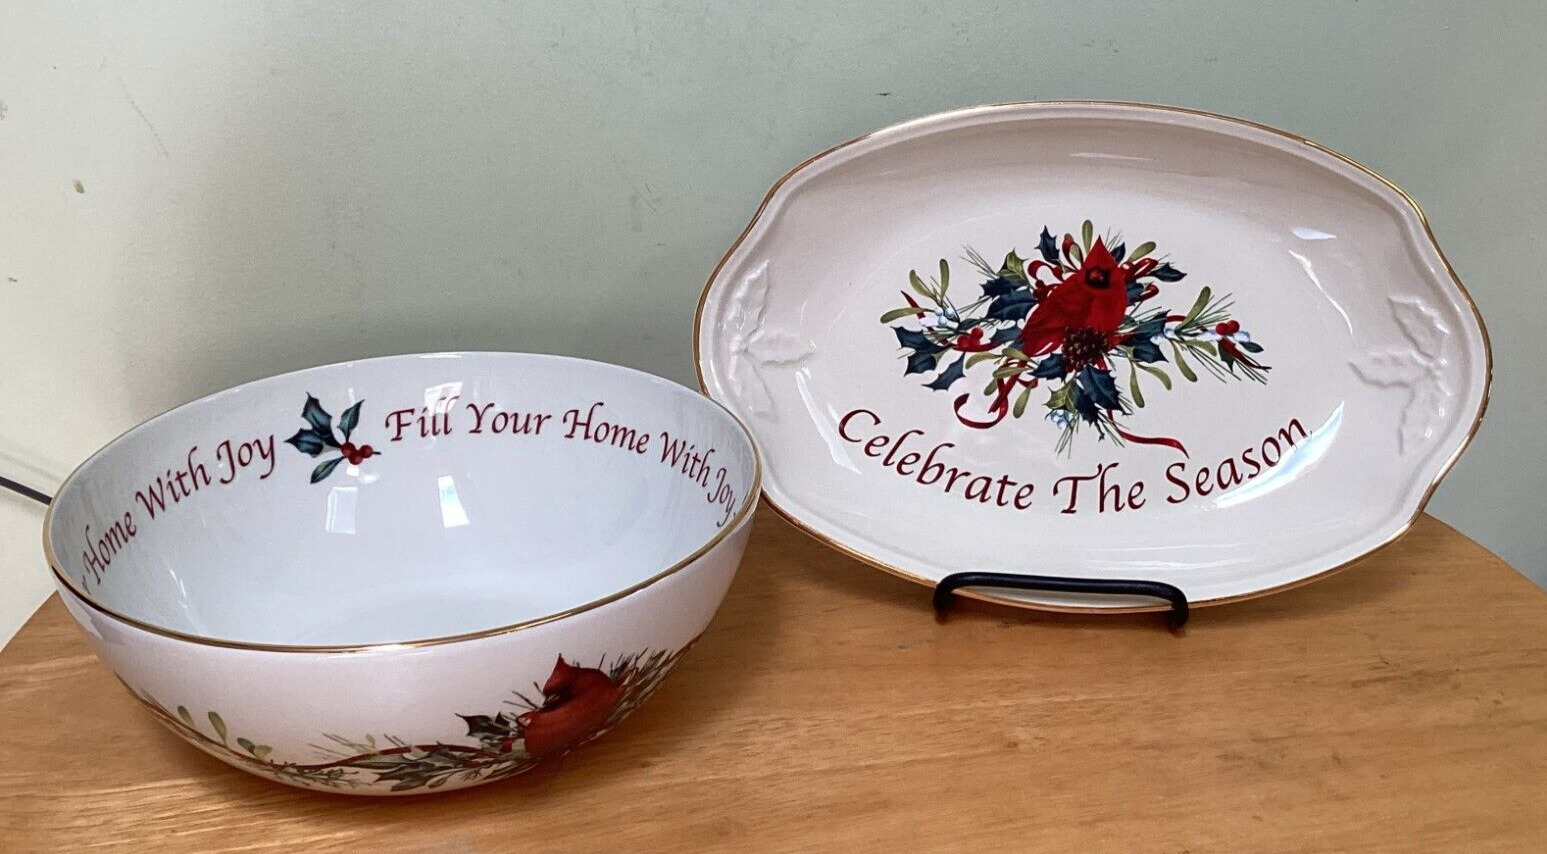 Lenox Winter Greetings Celebrate the Season Plate & Fill Your Home With Joy Bowl